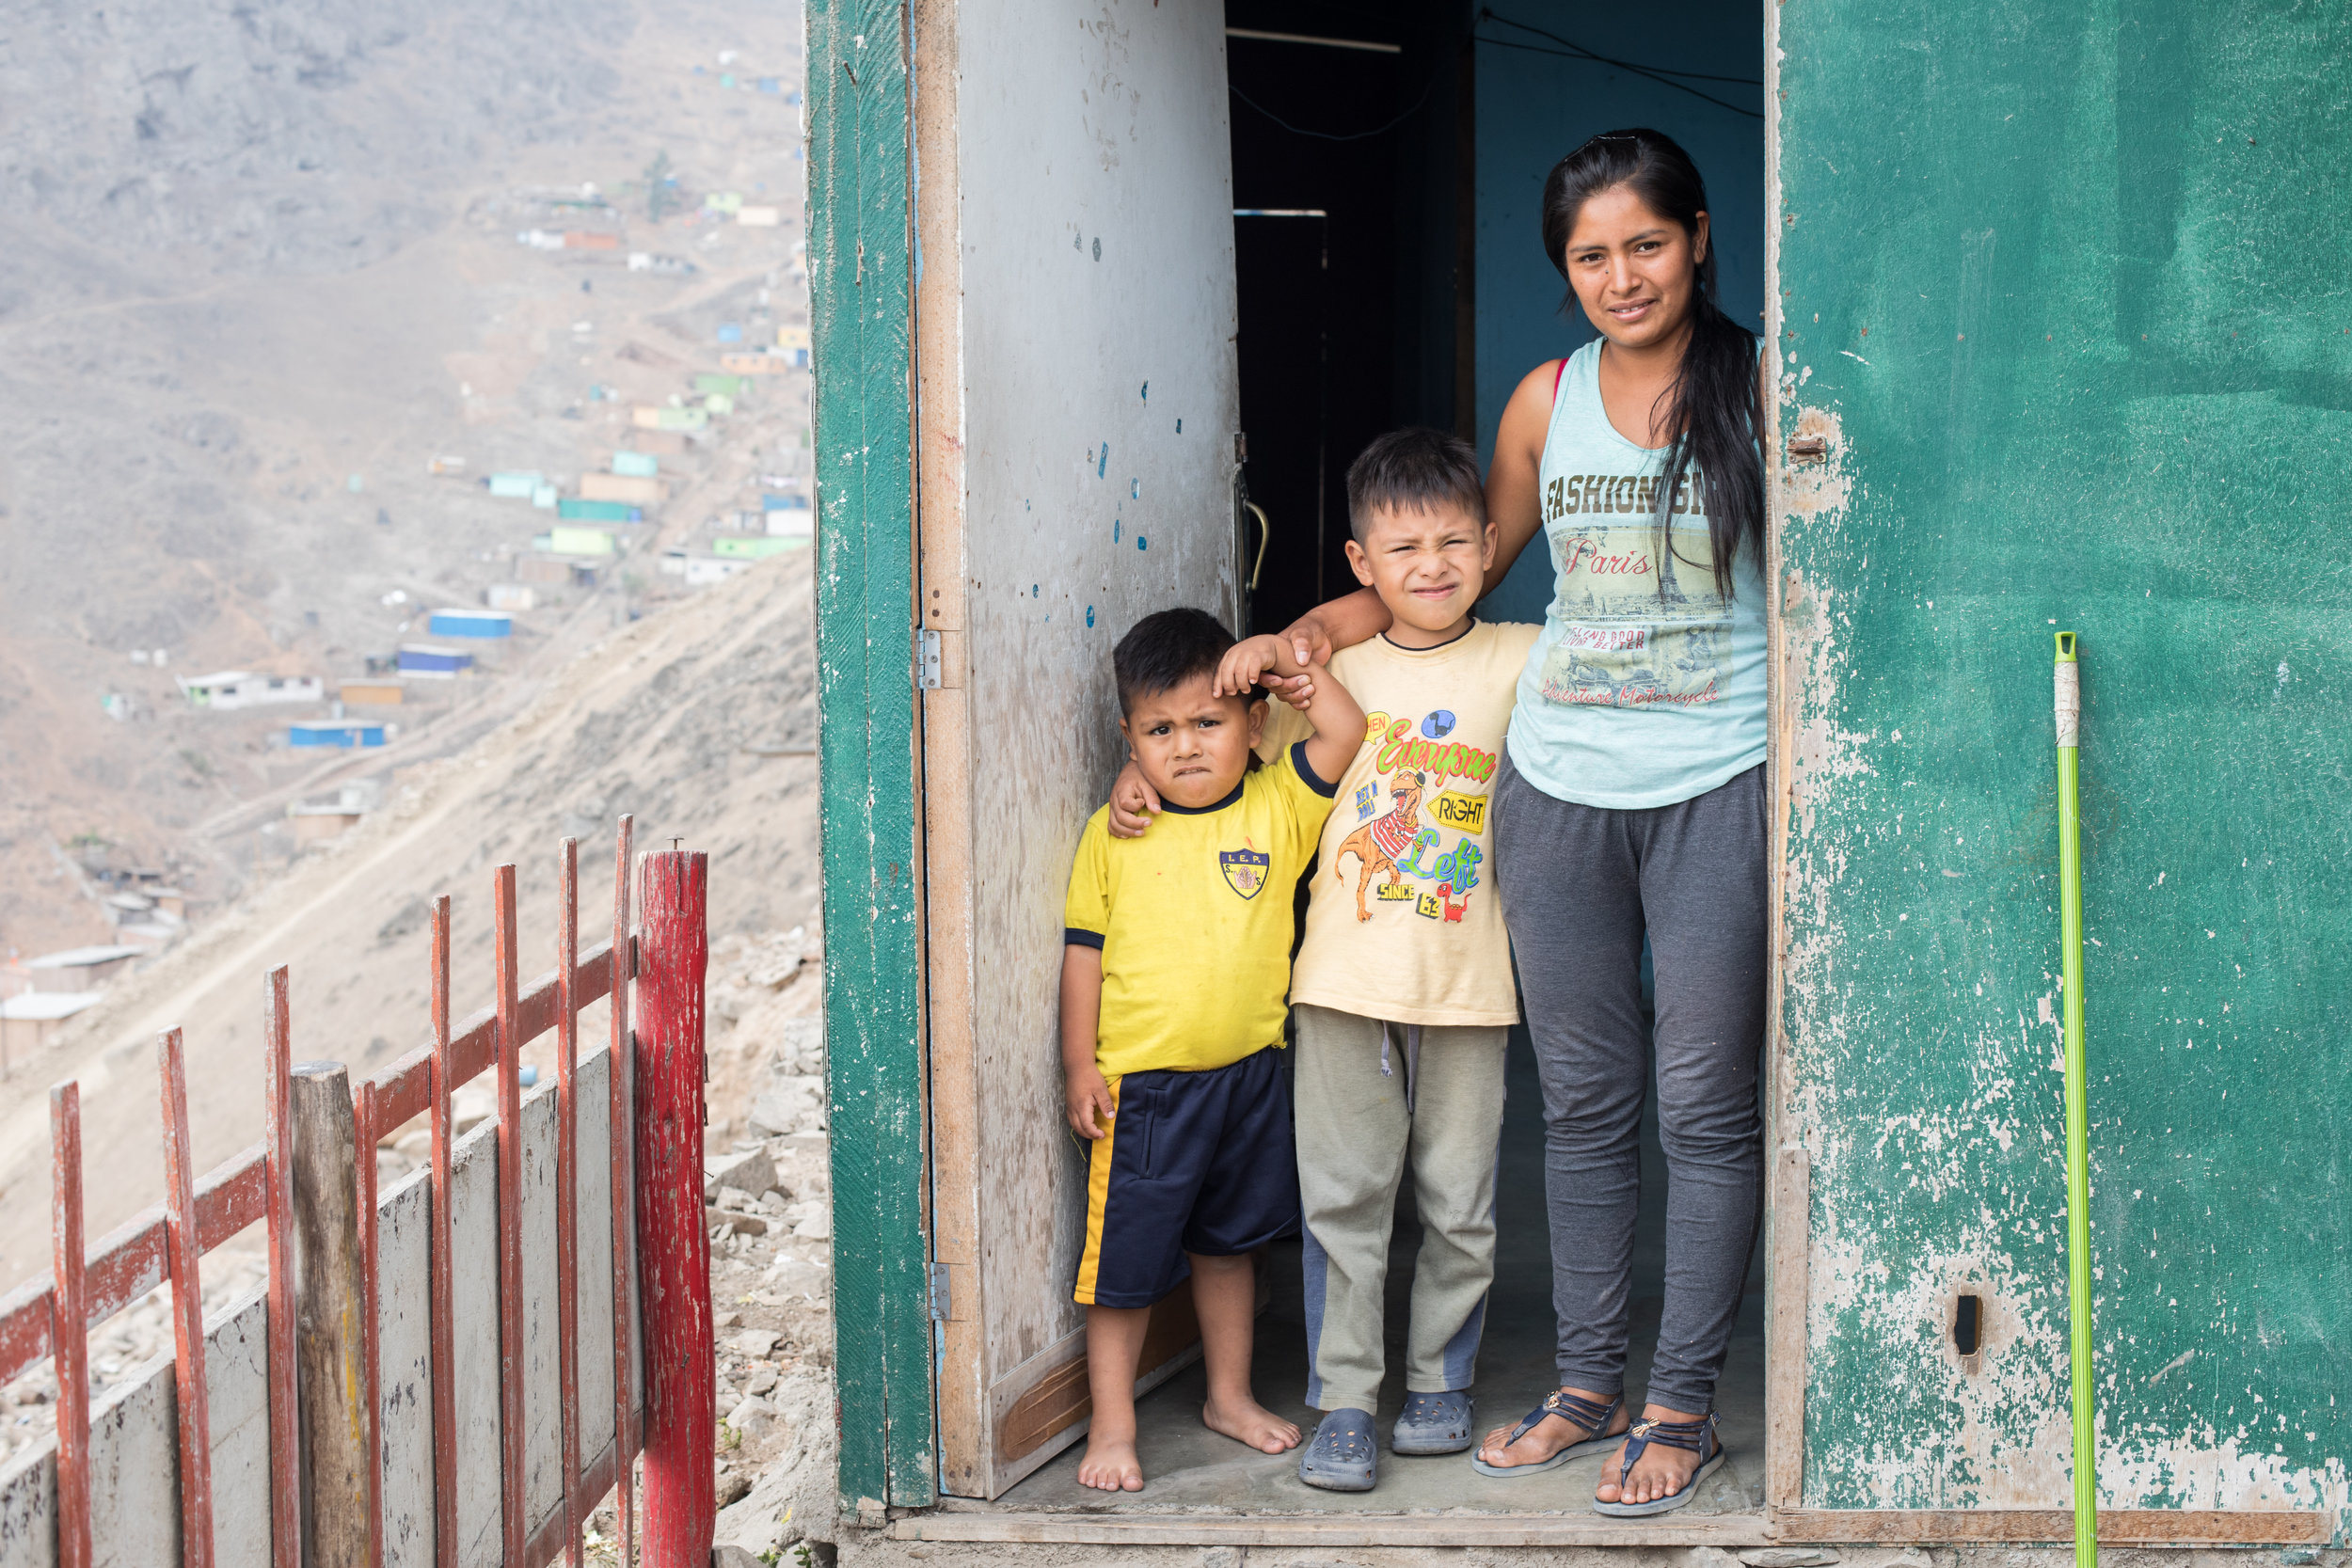 One of the lovely families we met at 'Hijos de Praderas', one of the communities supported by Reciprocity NGO.